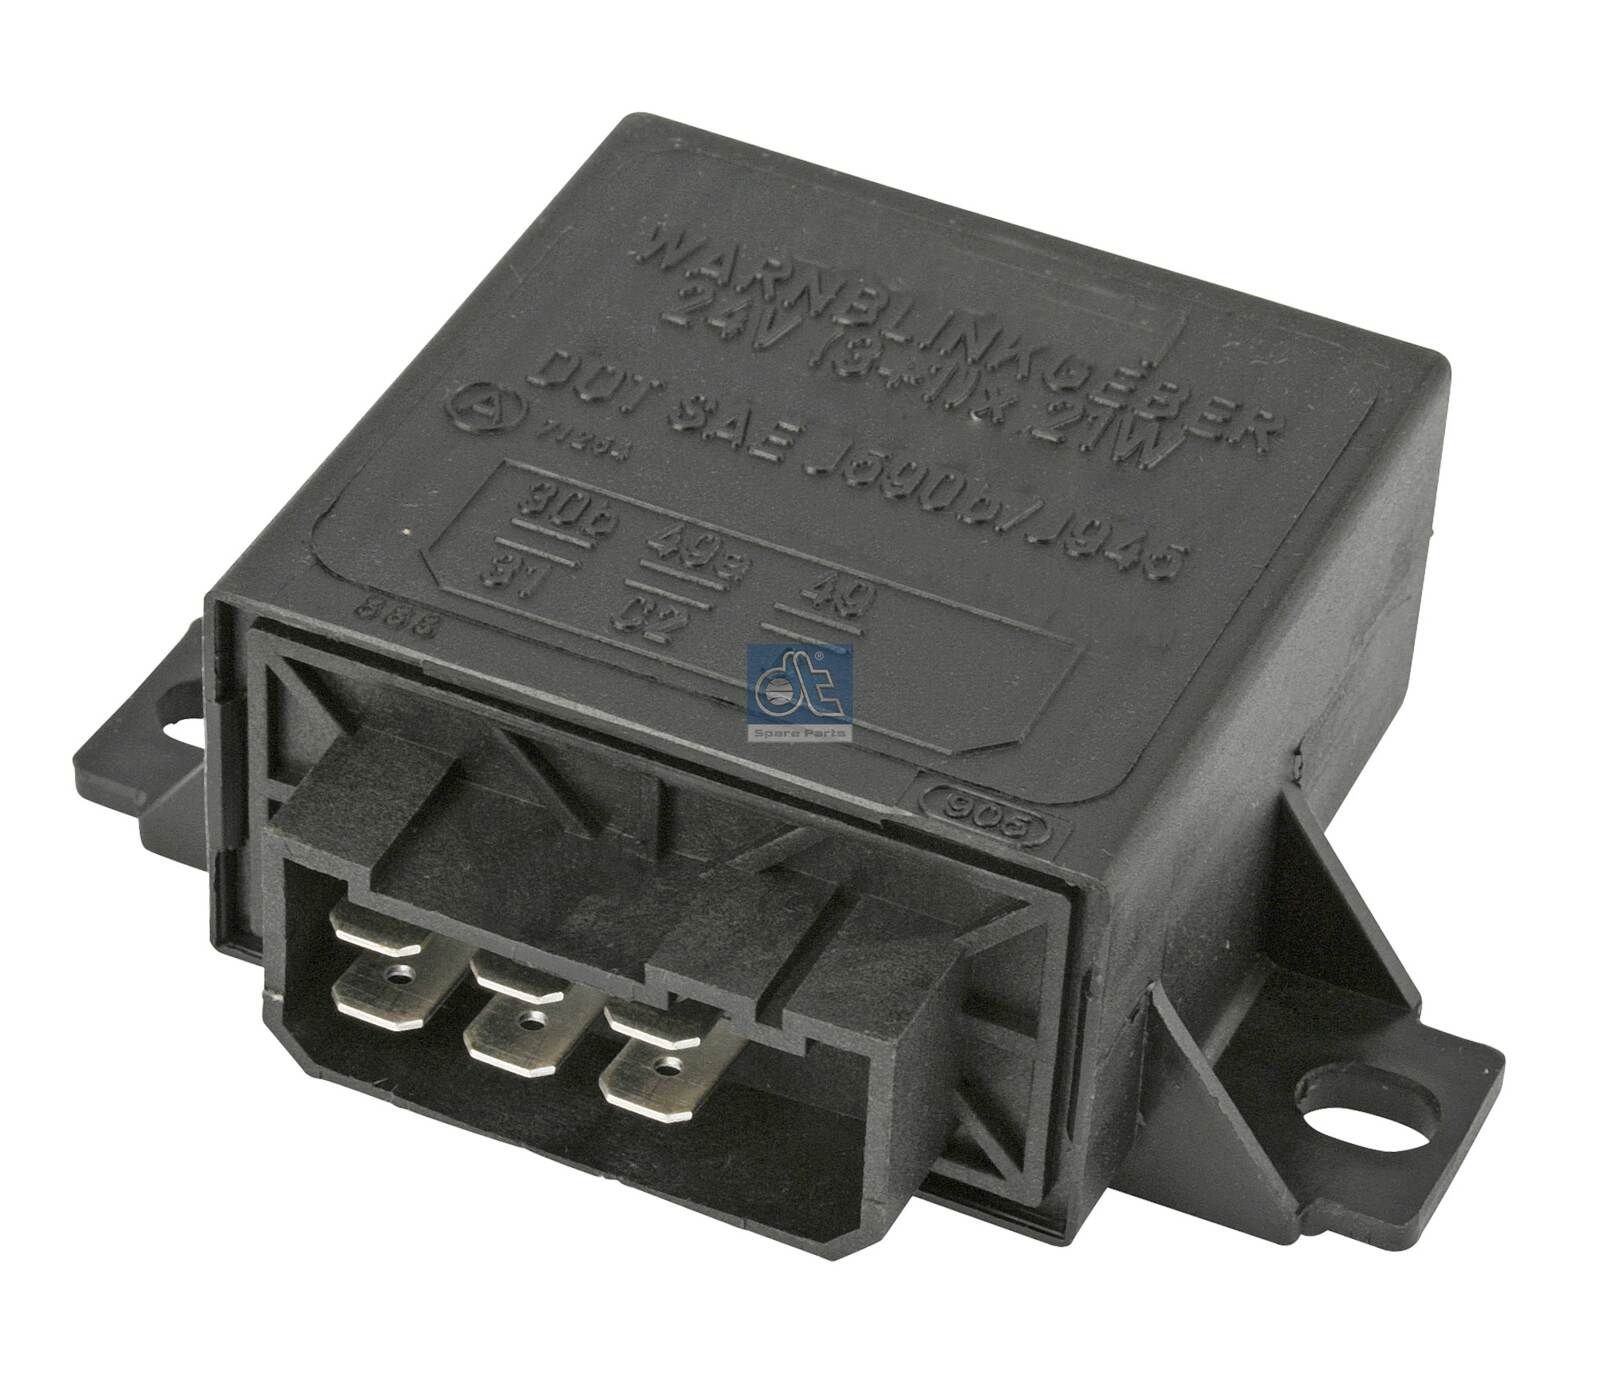 4DW 003 944-071 DT Spare Parts 24V, 21W, Electronic, 3+1 (8) x 21 W Flasher unit 2.25280 buy